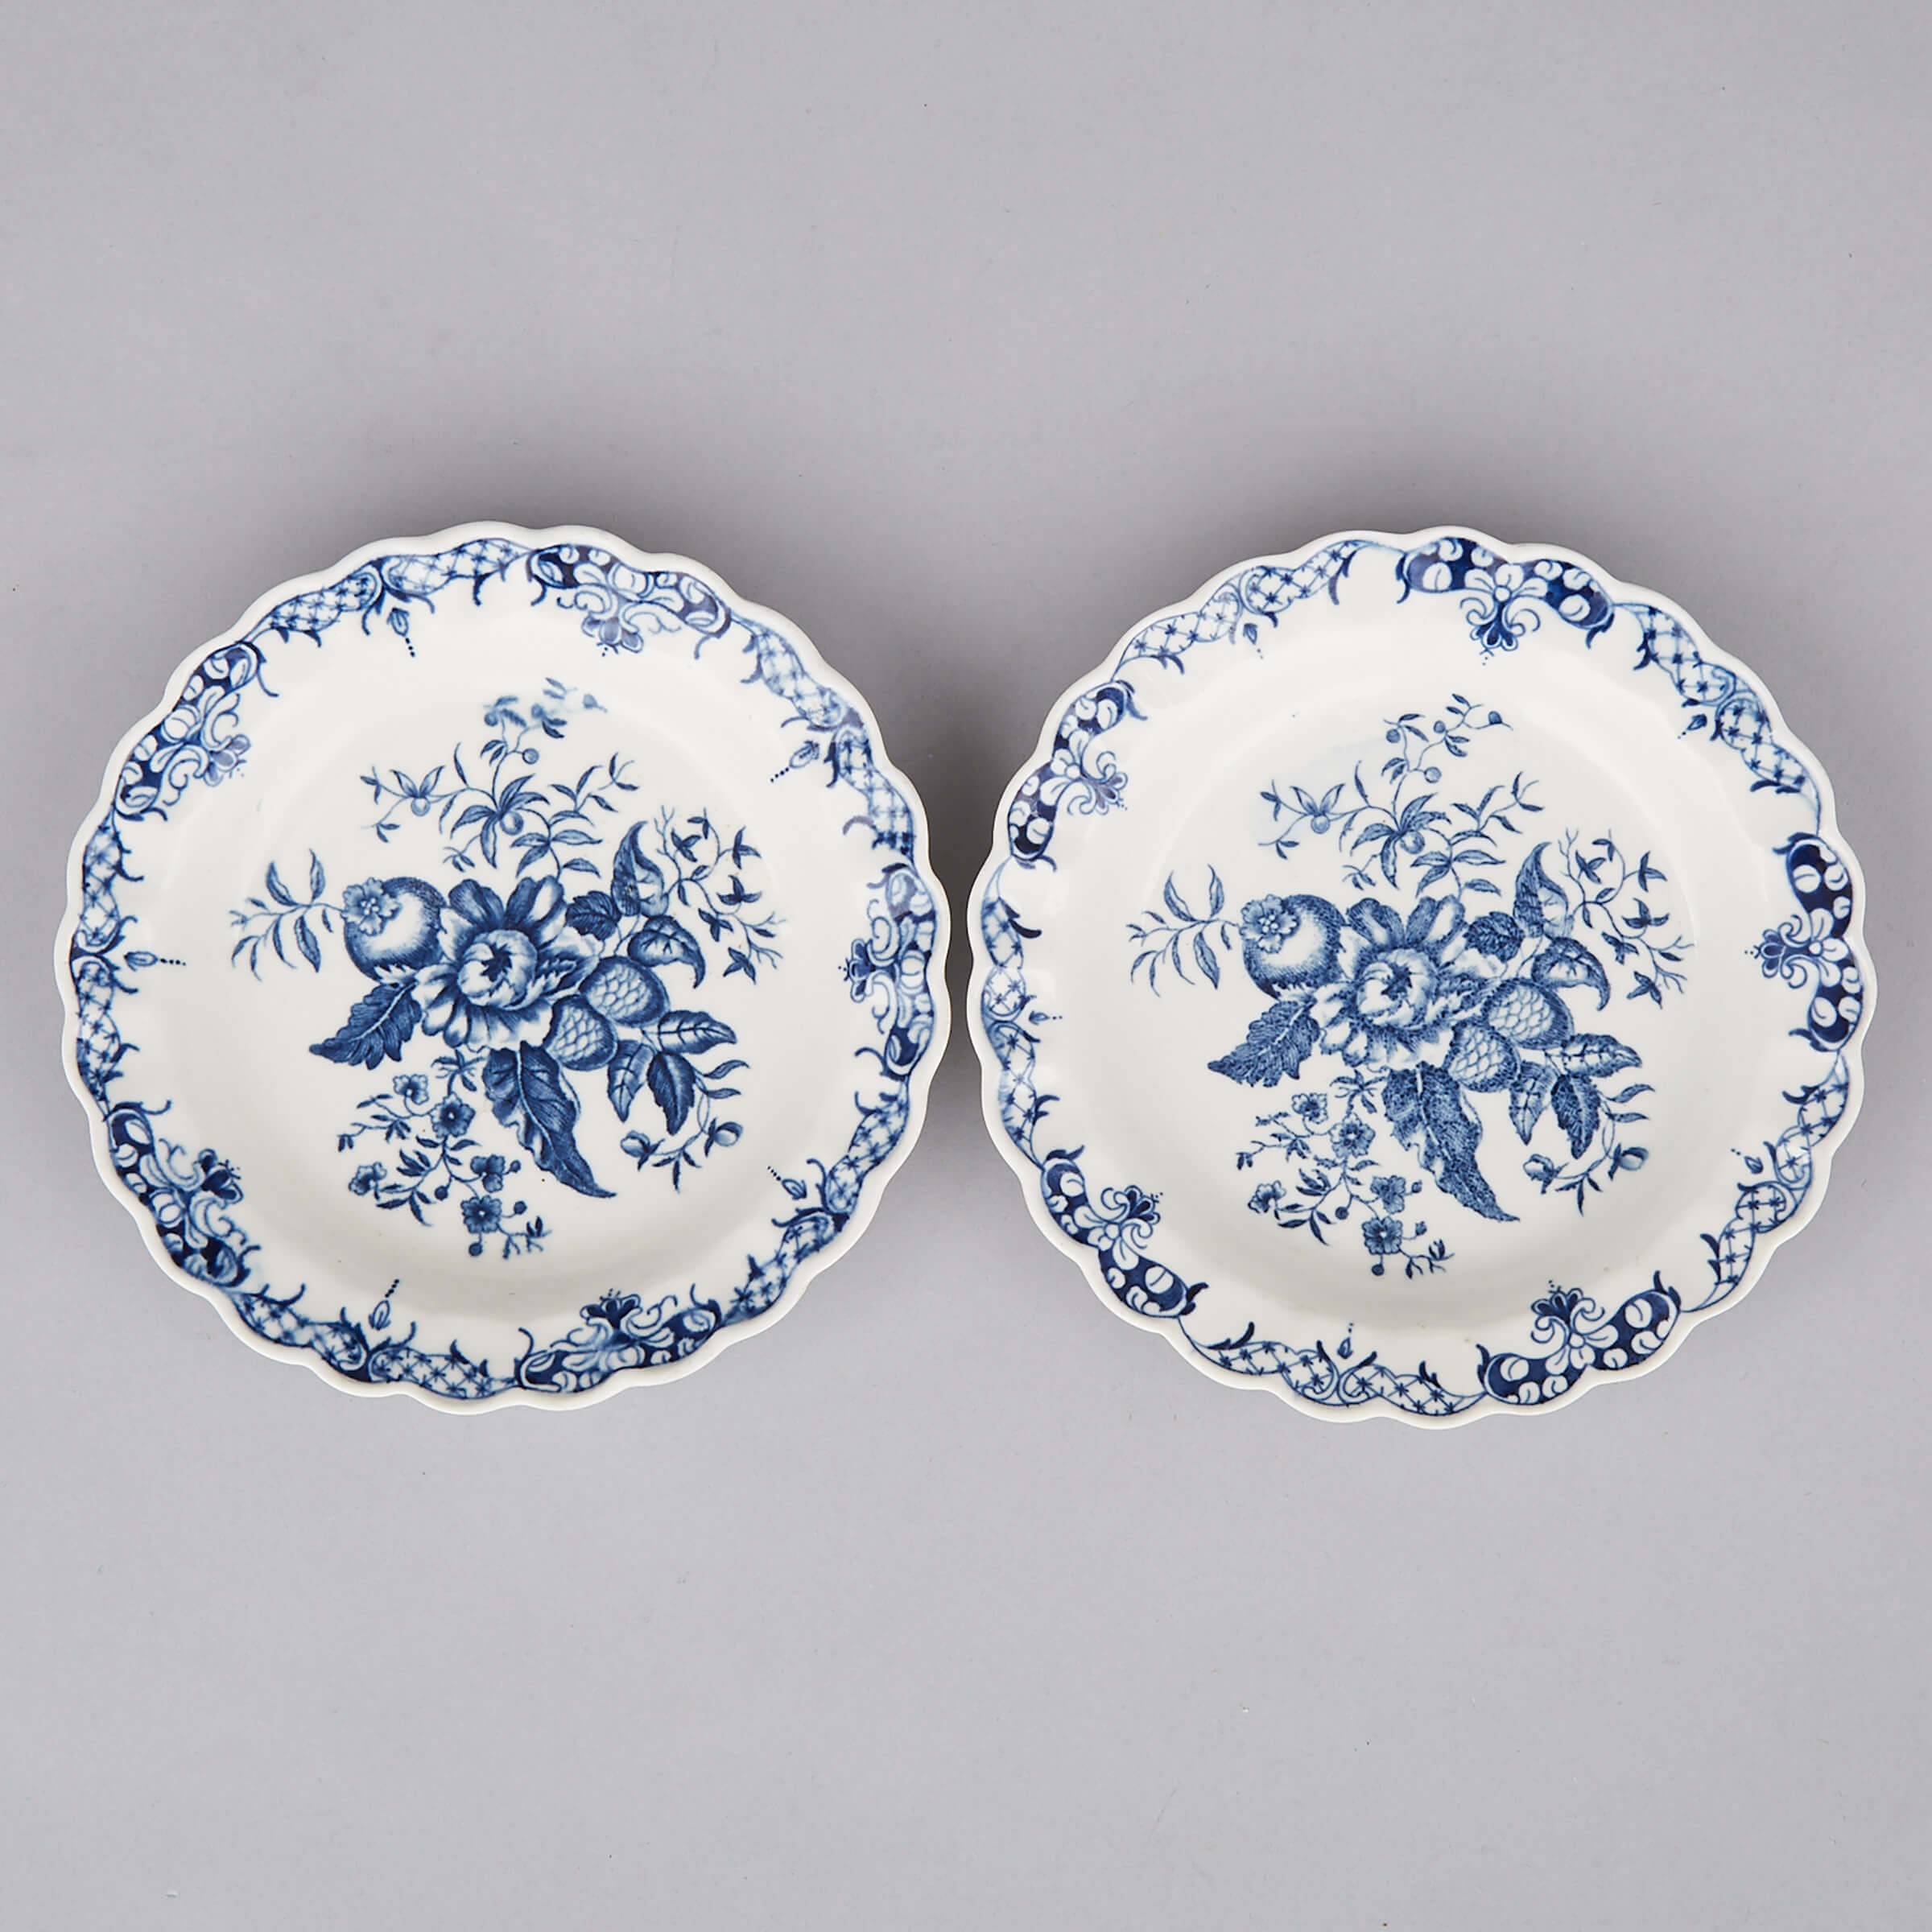 Pair of Worcester ‘Pine Cone’ Pattern Small Dishes, c.1770-85